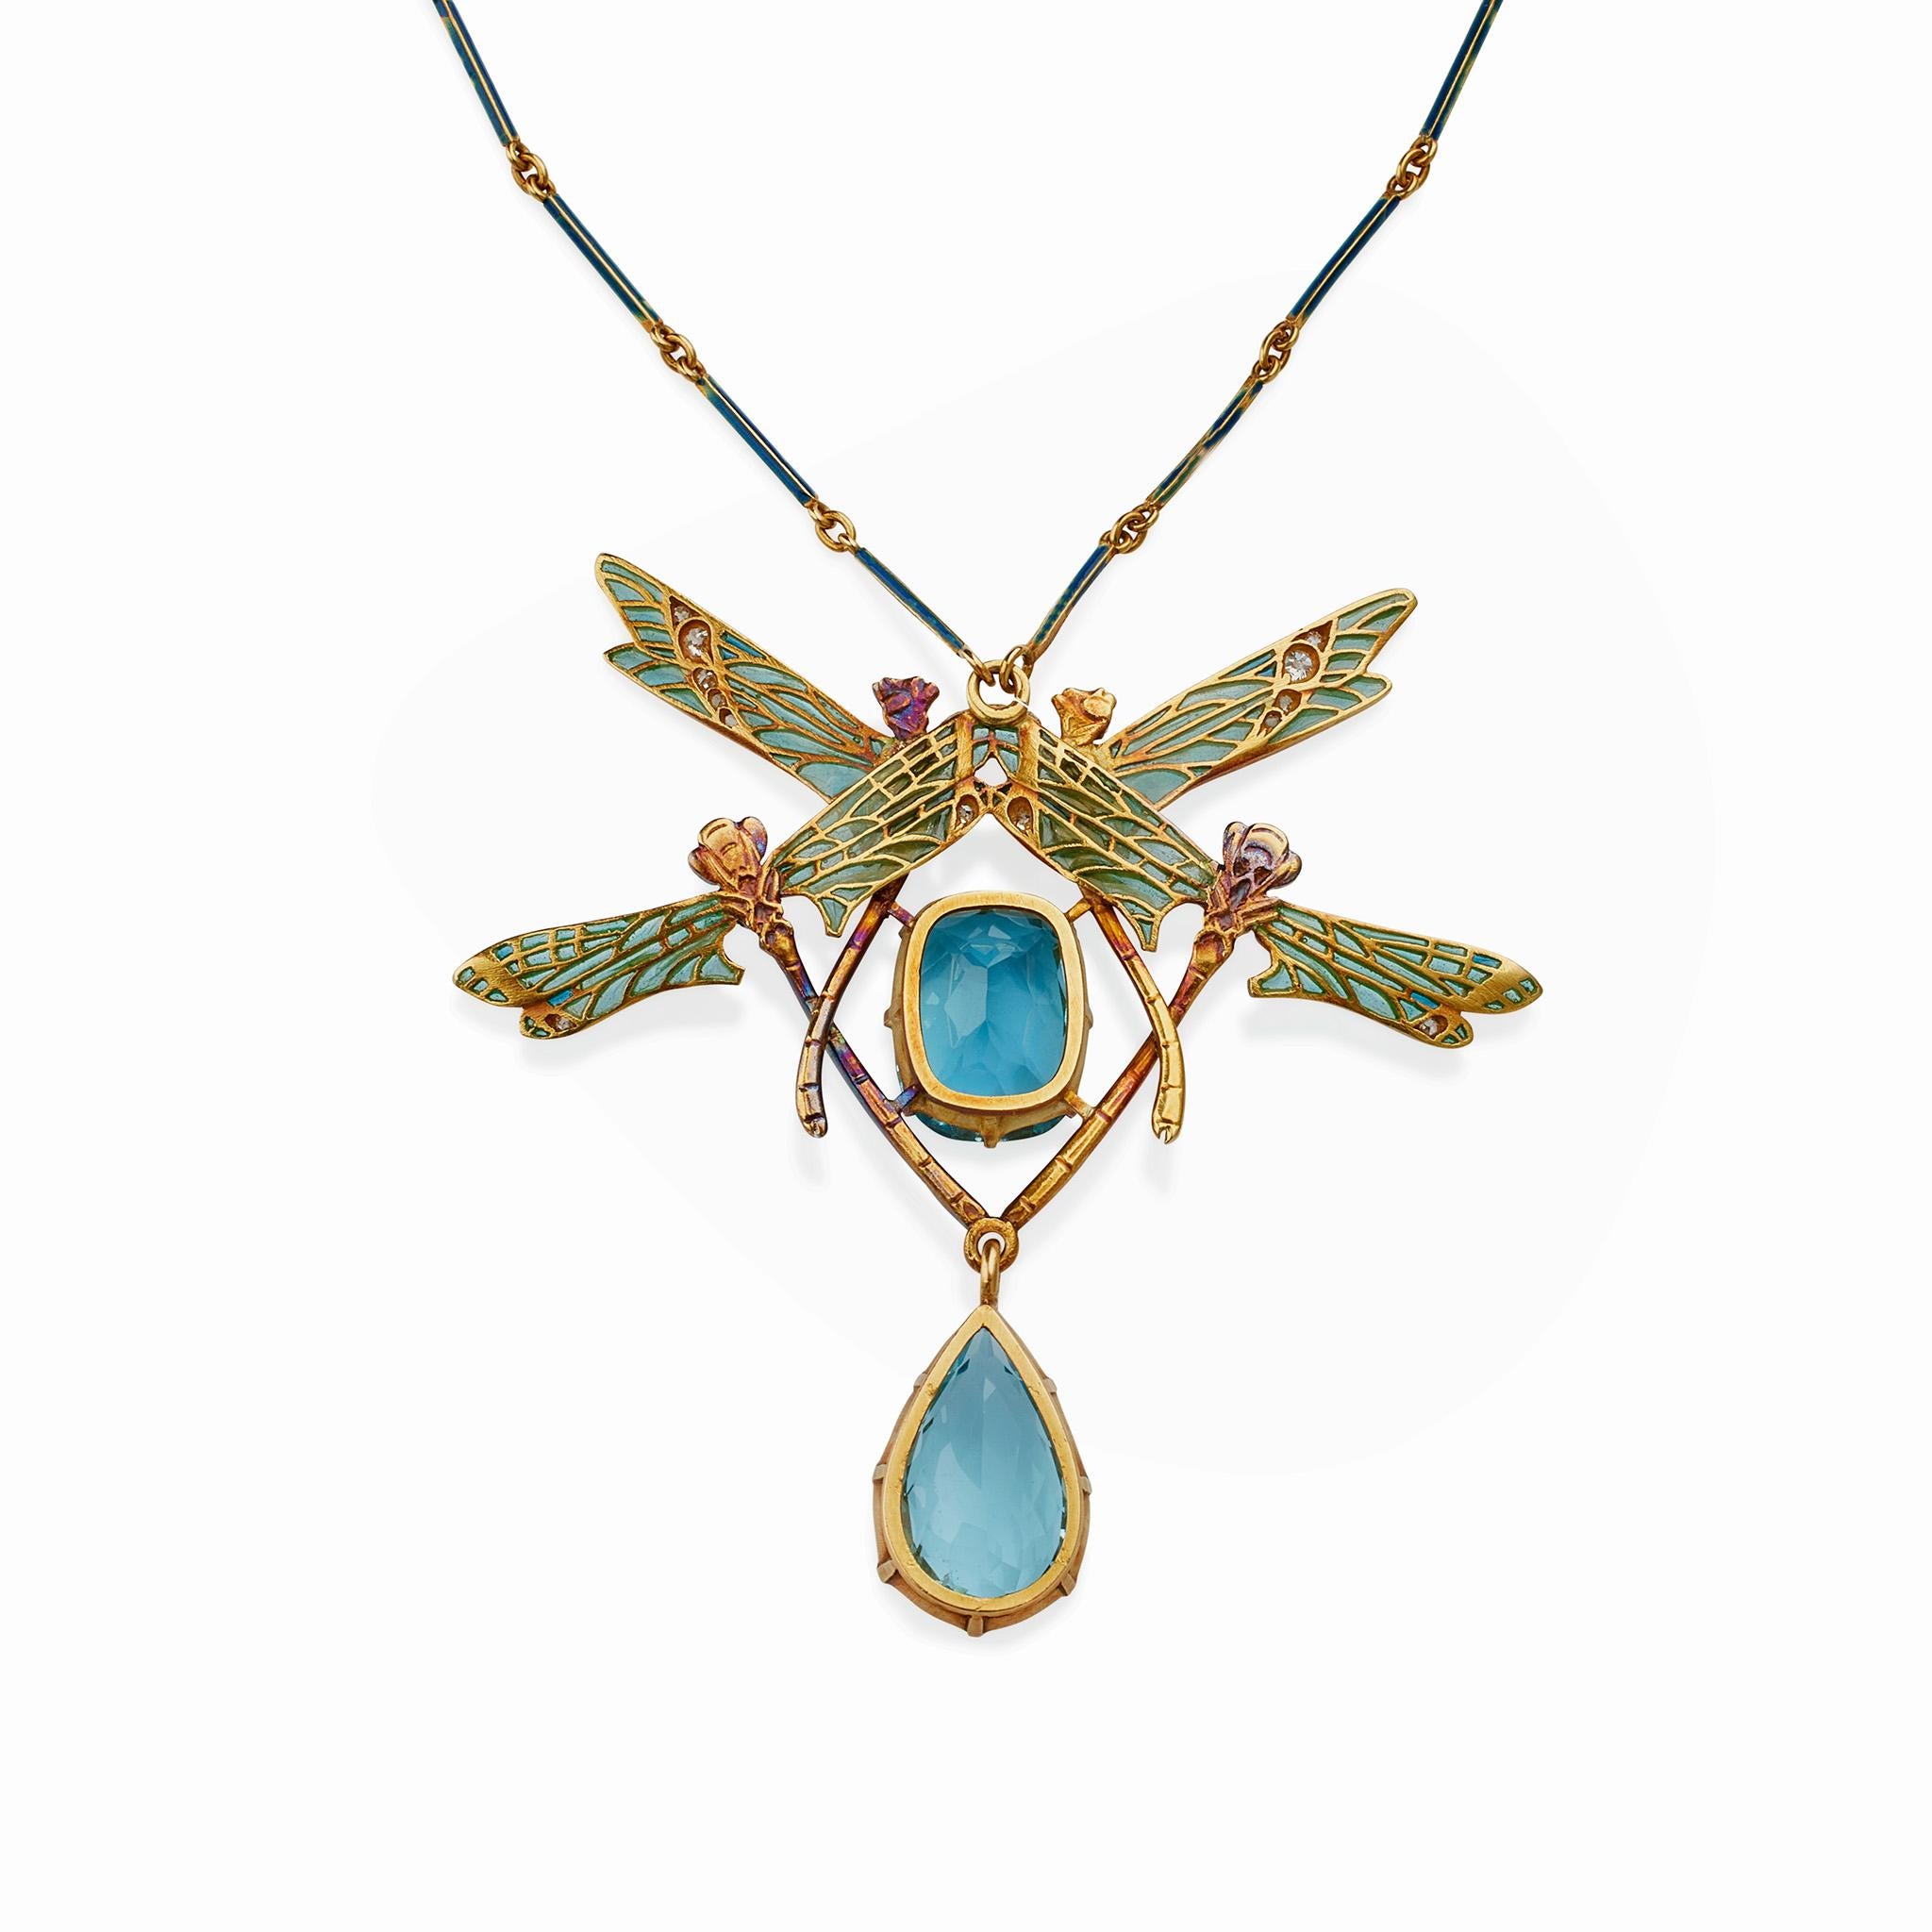 Created by René Lalique in 1903-1904, this four dragonfly pendant necklace is composed of plique-à-jour and basse taille enamel, aquamarine, diamonds and 18K gold. It is designed as two pairs of opposed dragonflies with plique-à-jour enamel wings